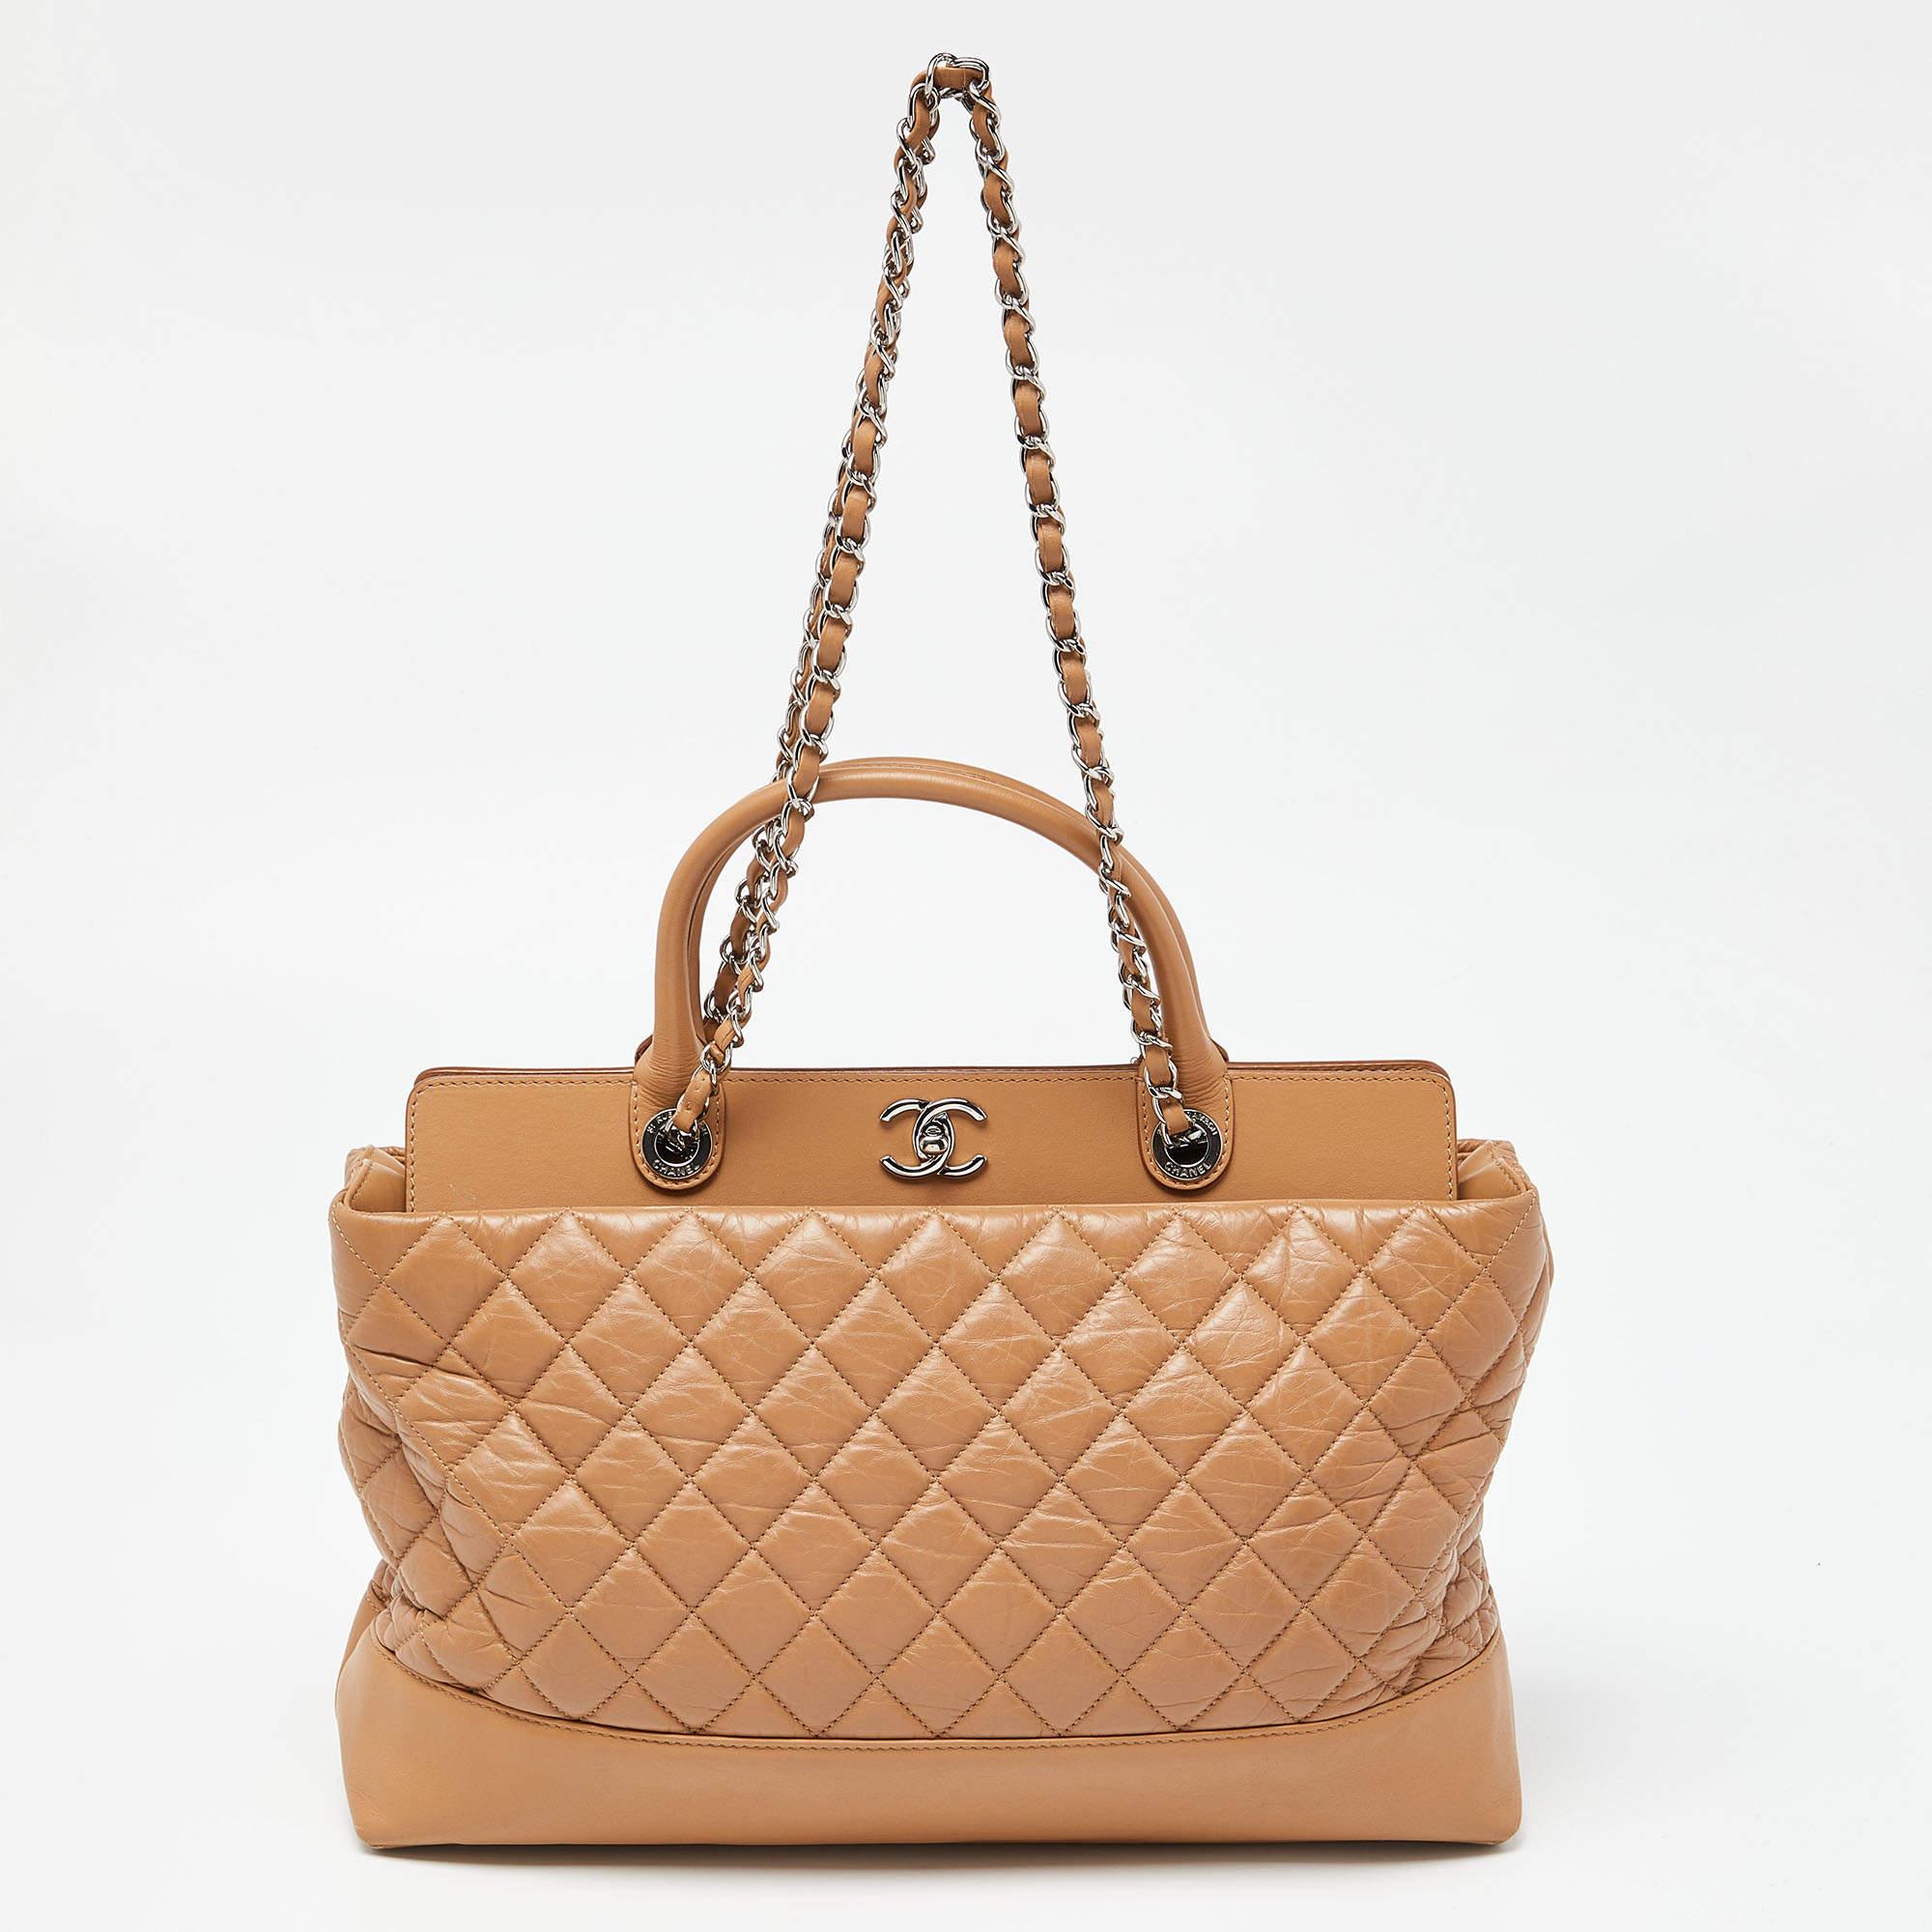 Chanel Beige Quilted Leather CC Shopper Tote 8